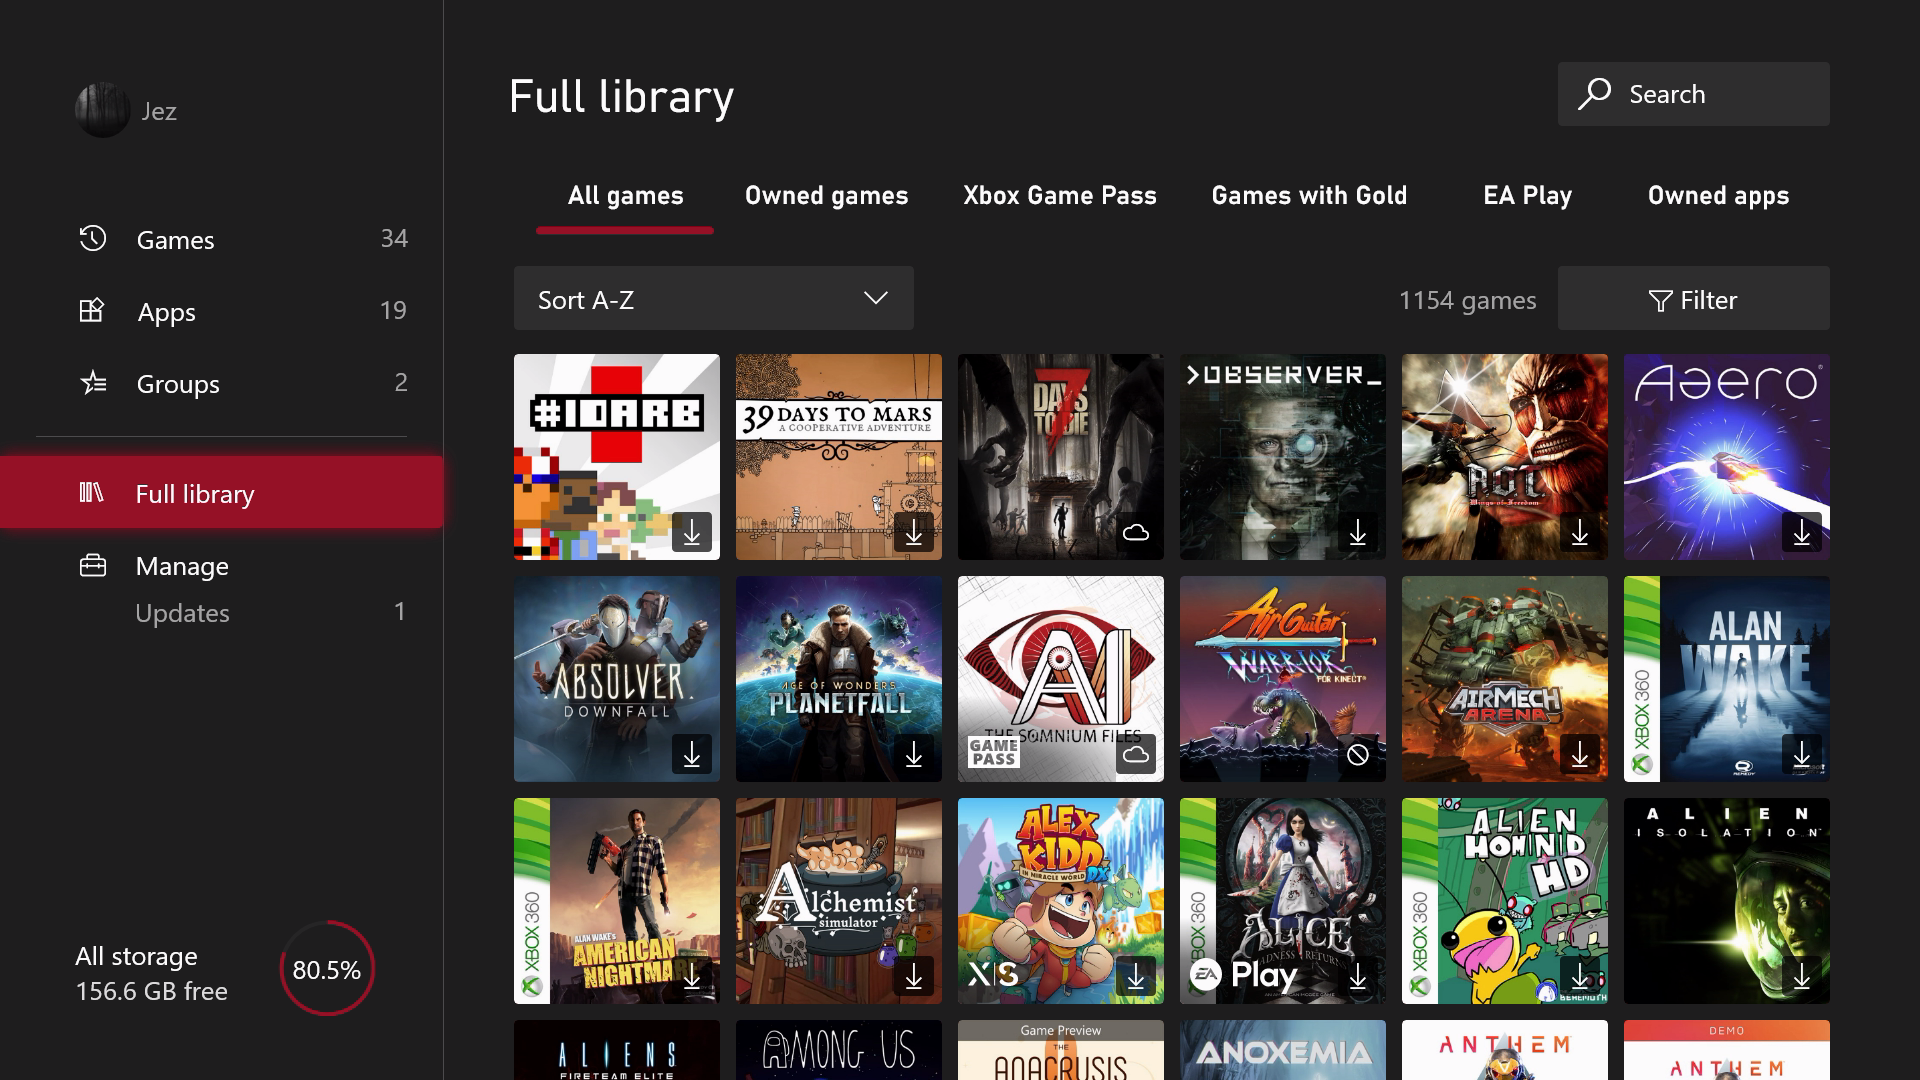 Complete library of Xbox games and apps, redesigned as of August 2022